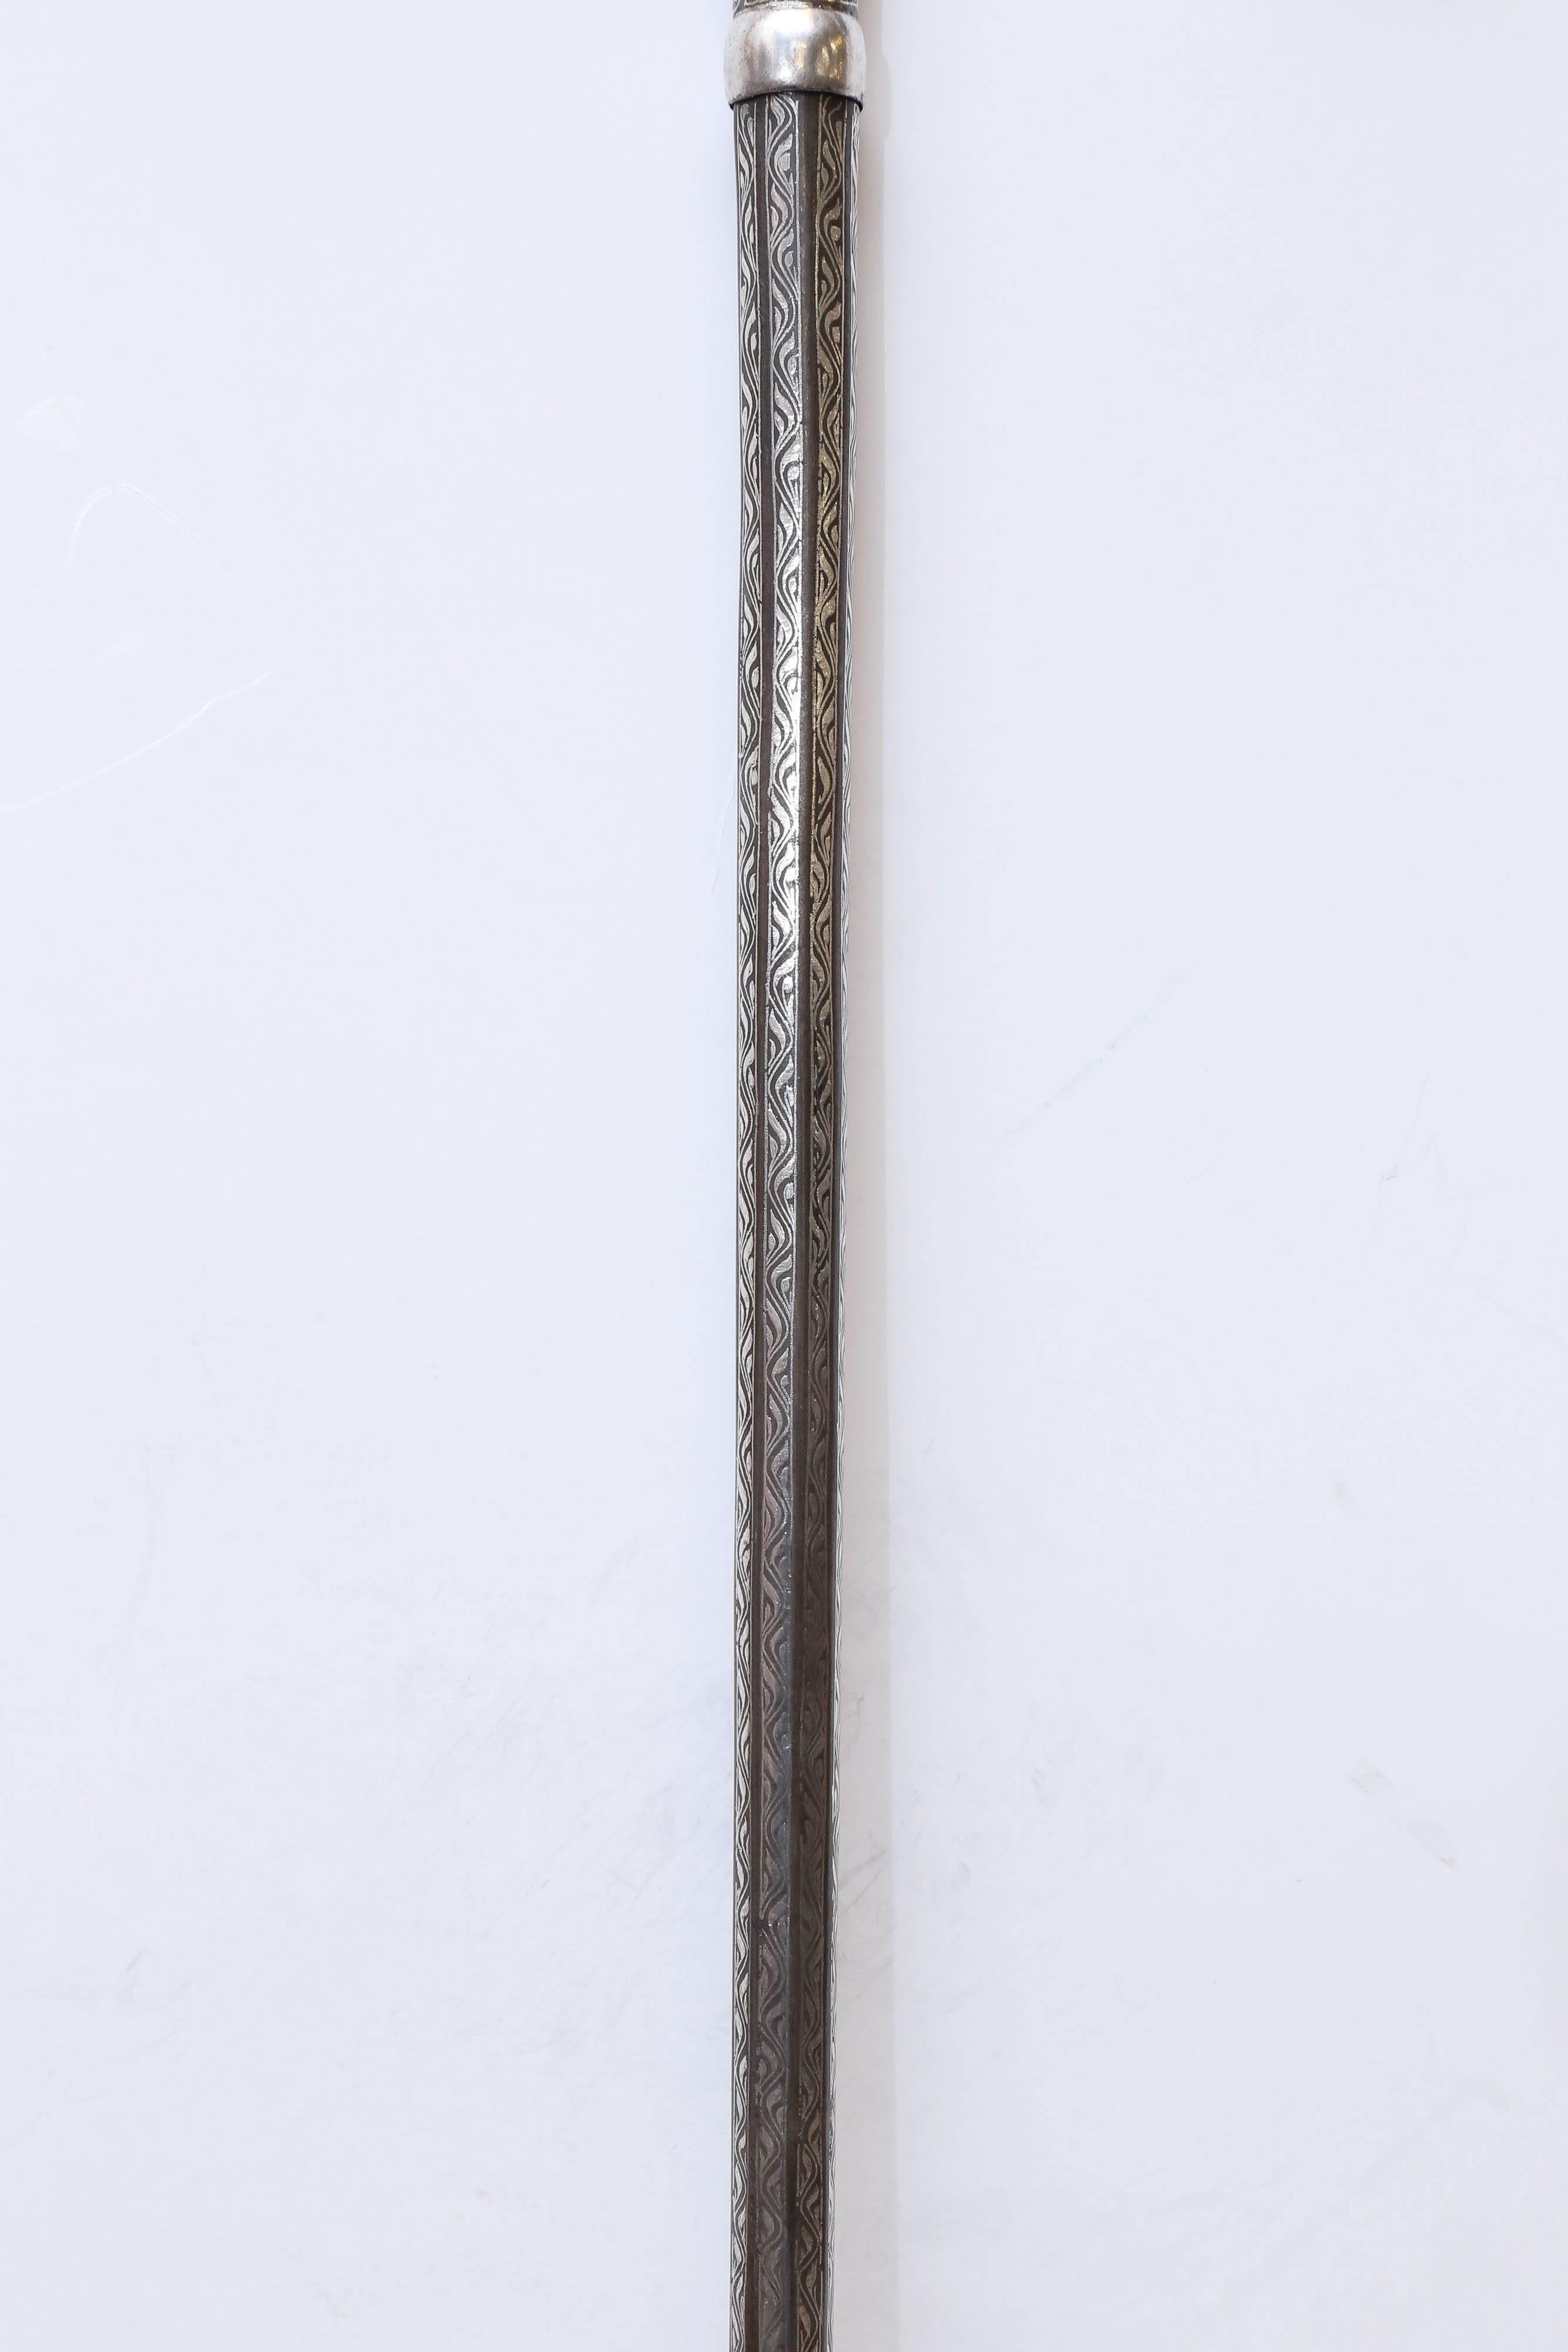 Metalwork Early 20th Century Iron Walking Stick with Museum Quality Silver Filigree Work